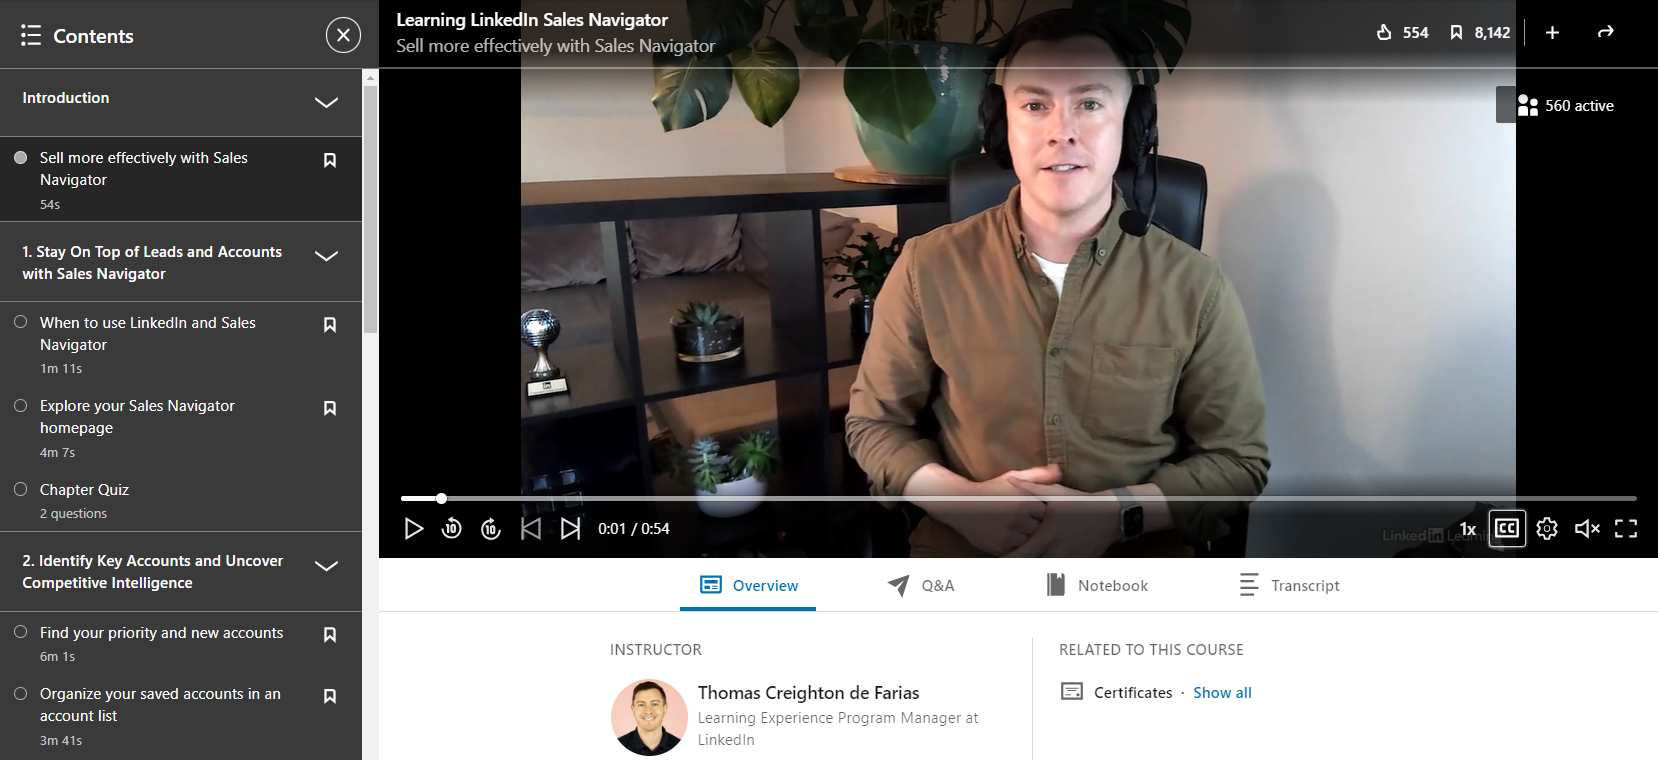 Screenshot from course on how to work with LinkedIn's Sales Navigator with Thomas Creighton de Farias